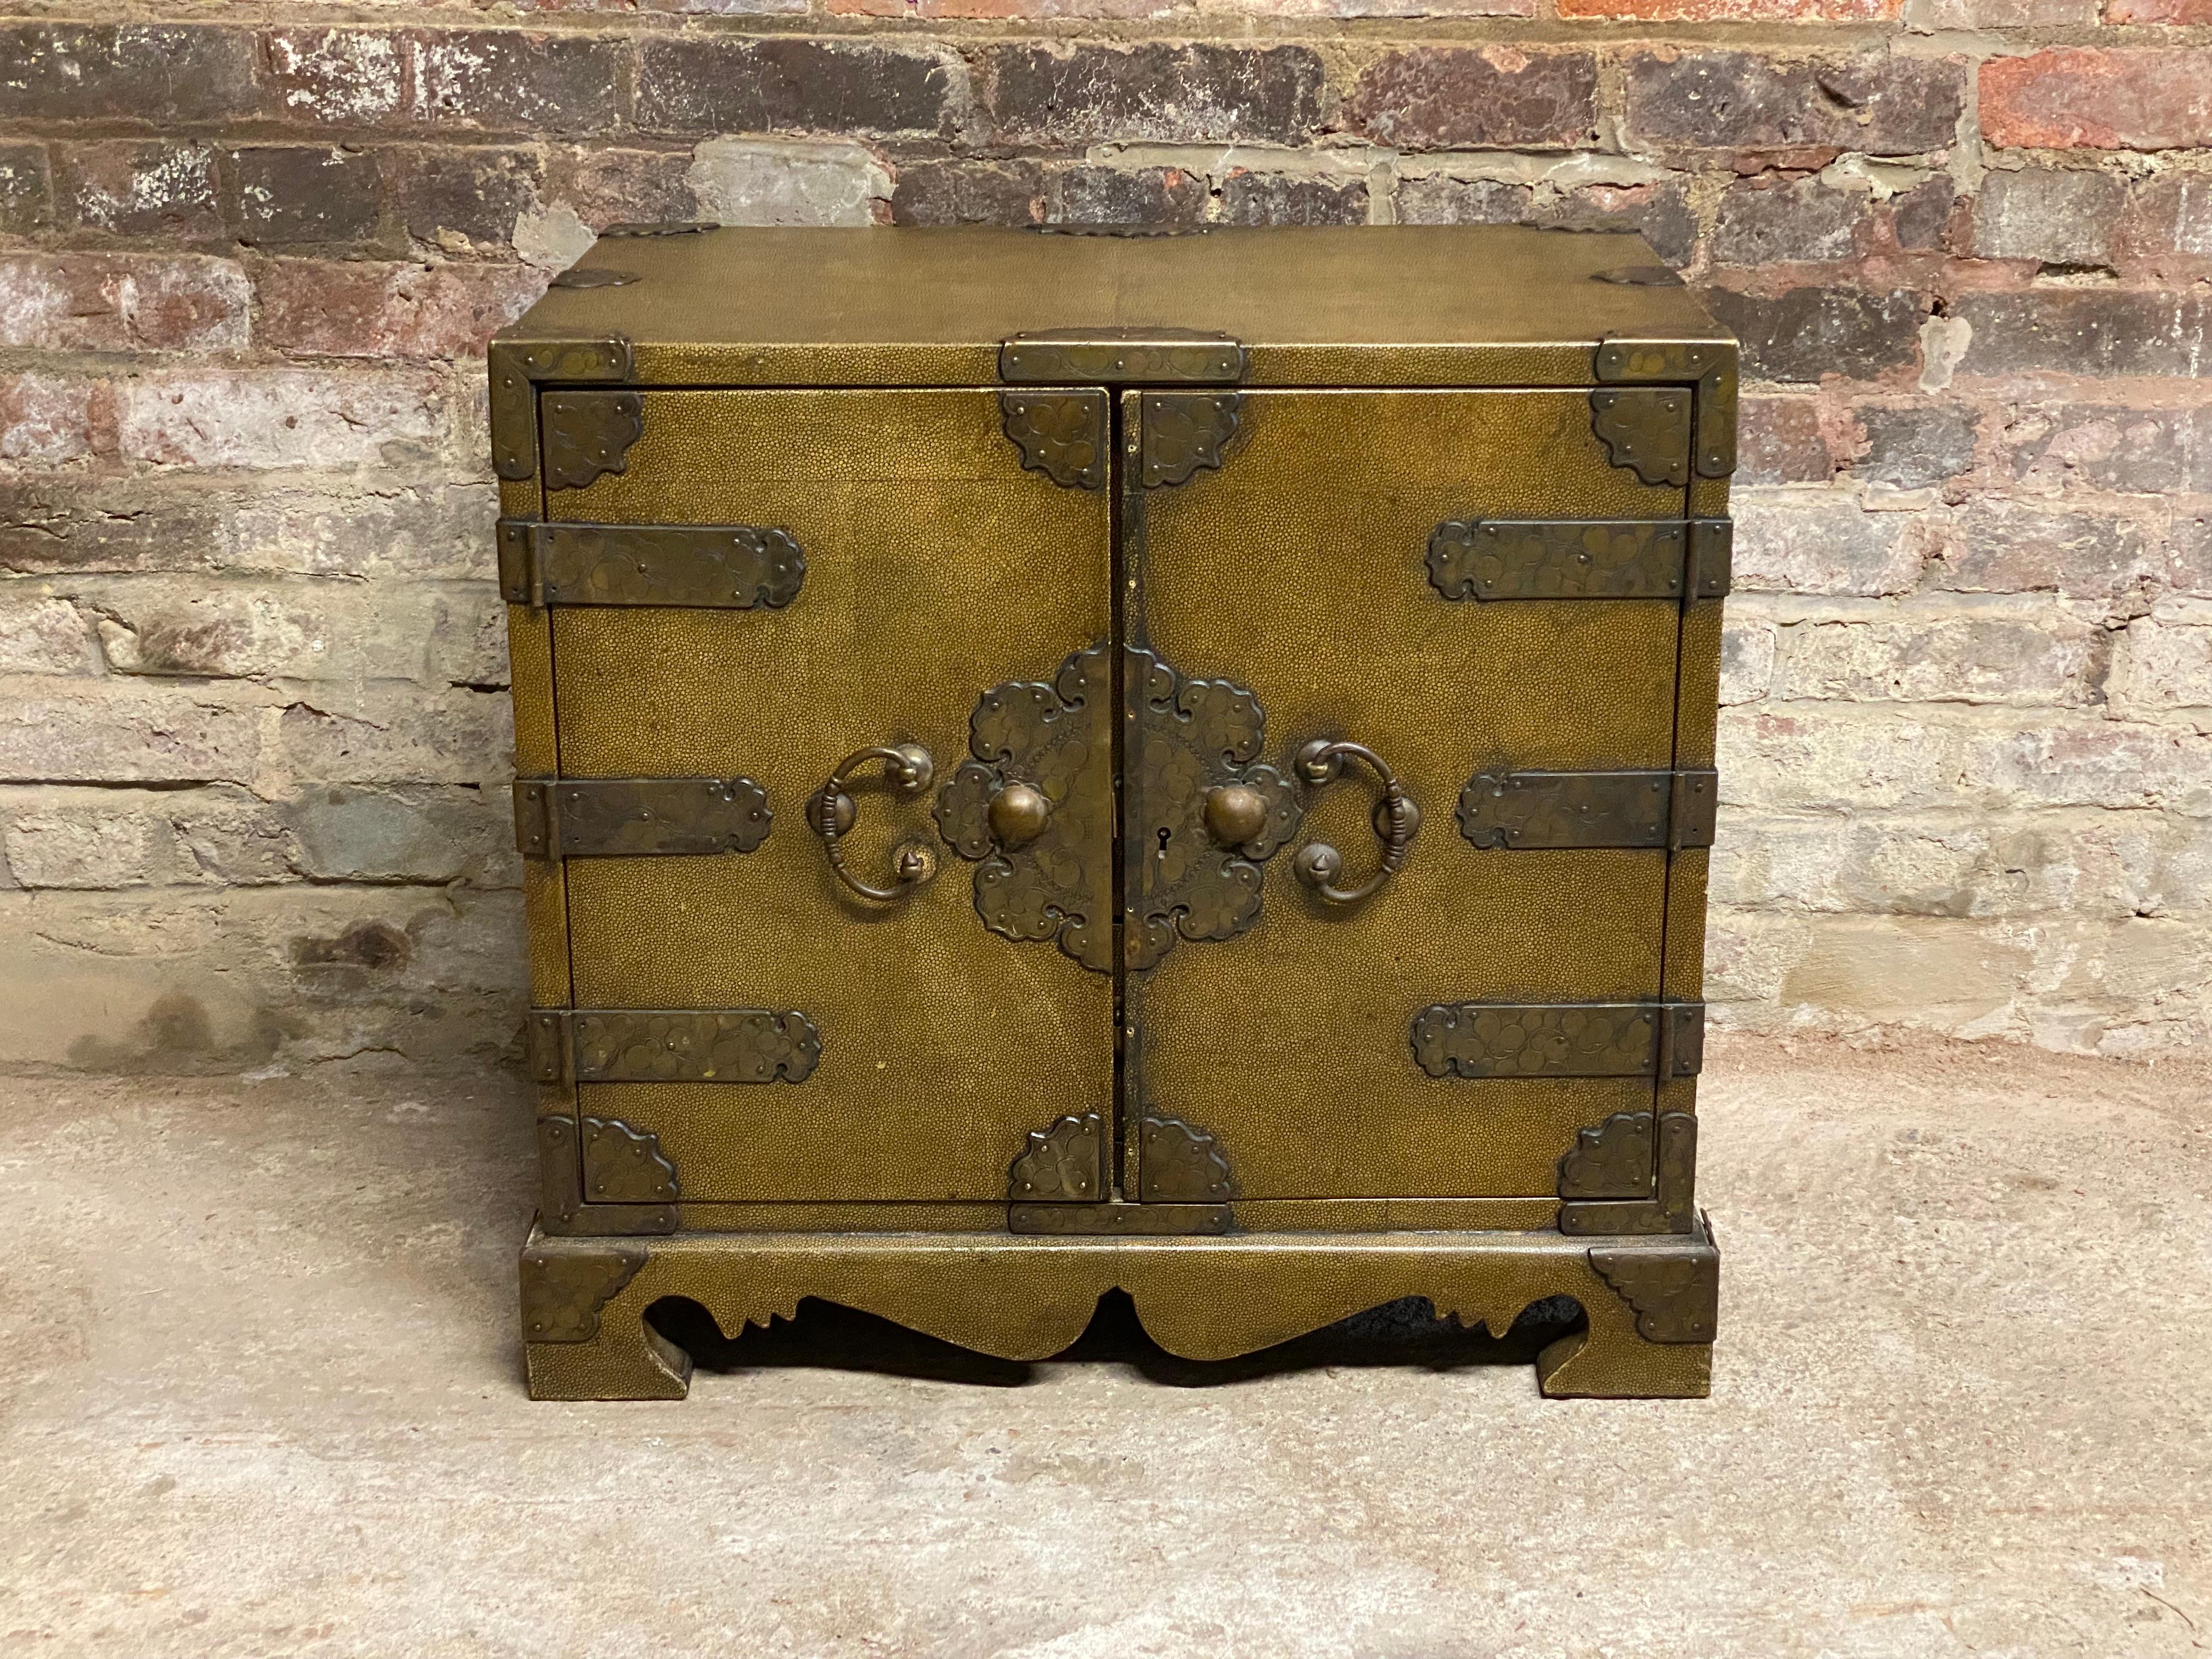 Japanese shagreen clad mini tansu. Beautifully cast and engraved floral and scrolled hardware, hinges and mounts. Block front cabinet with two doors and five interior drawers supported by a sinuous scrolled base. The interior drawers are painted